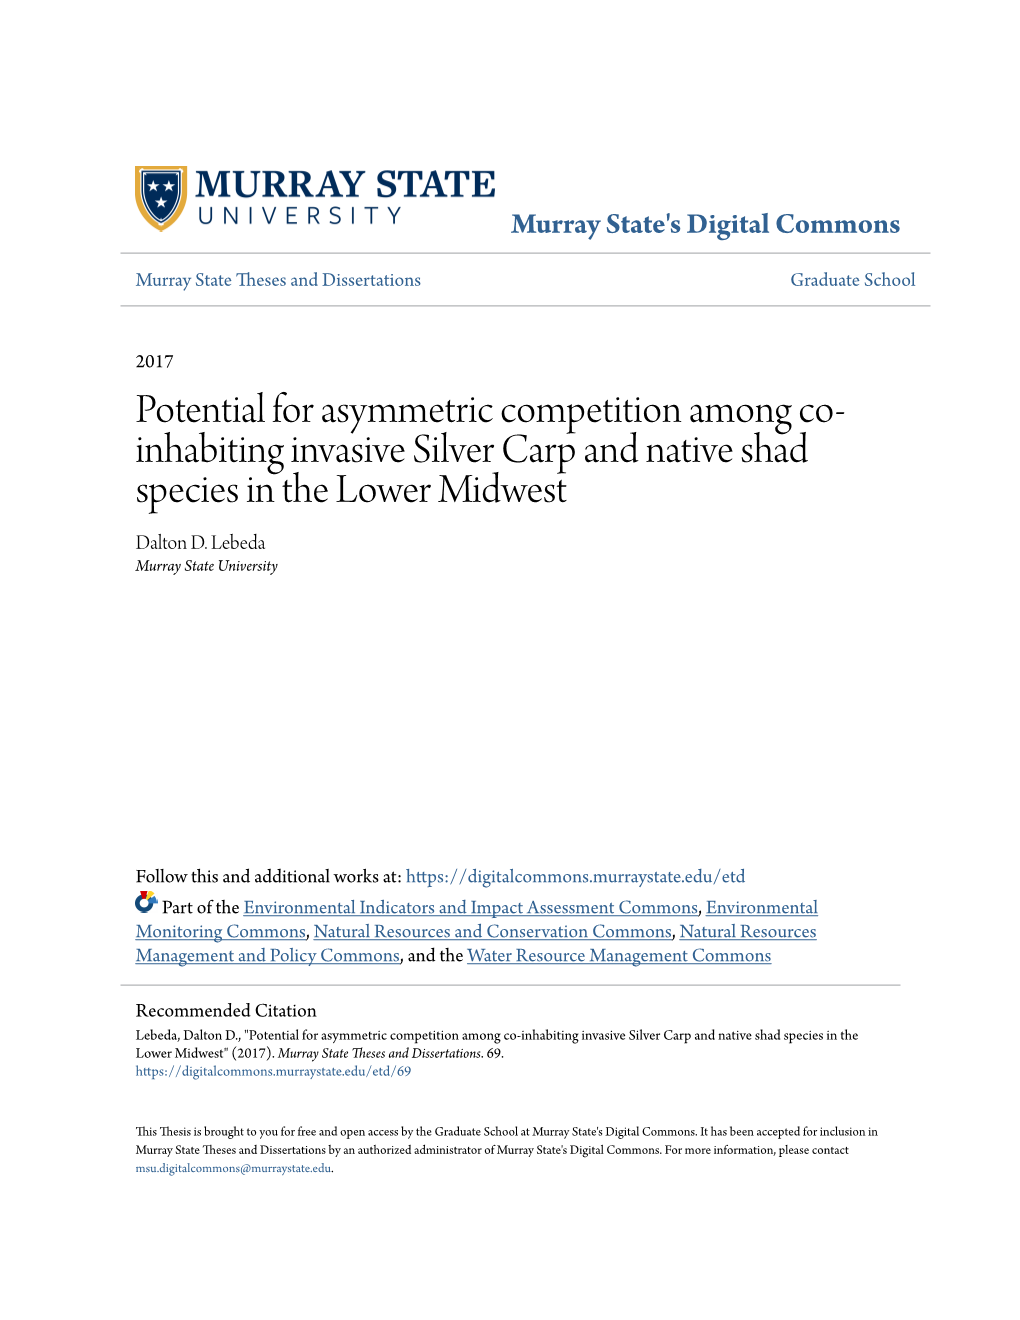 Potential for Asymmetric Competition Among Co-Inhabiting Invasive Silver Carp and Native Shad Species in the Lower Midwest" (2017)